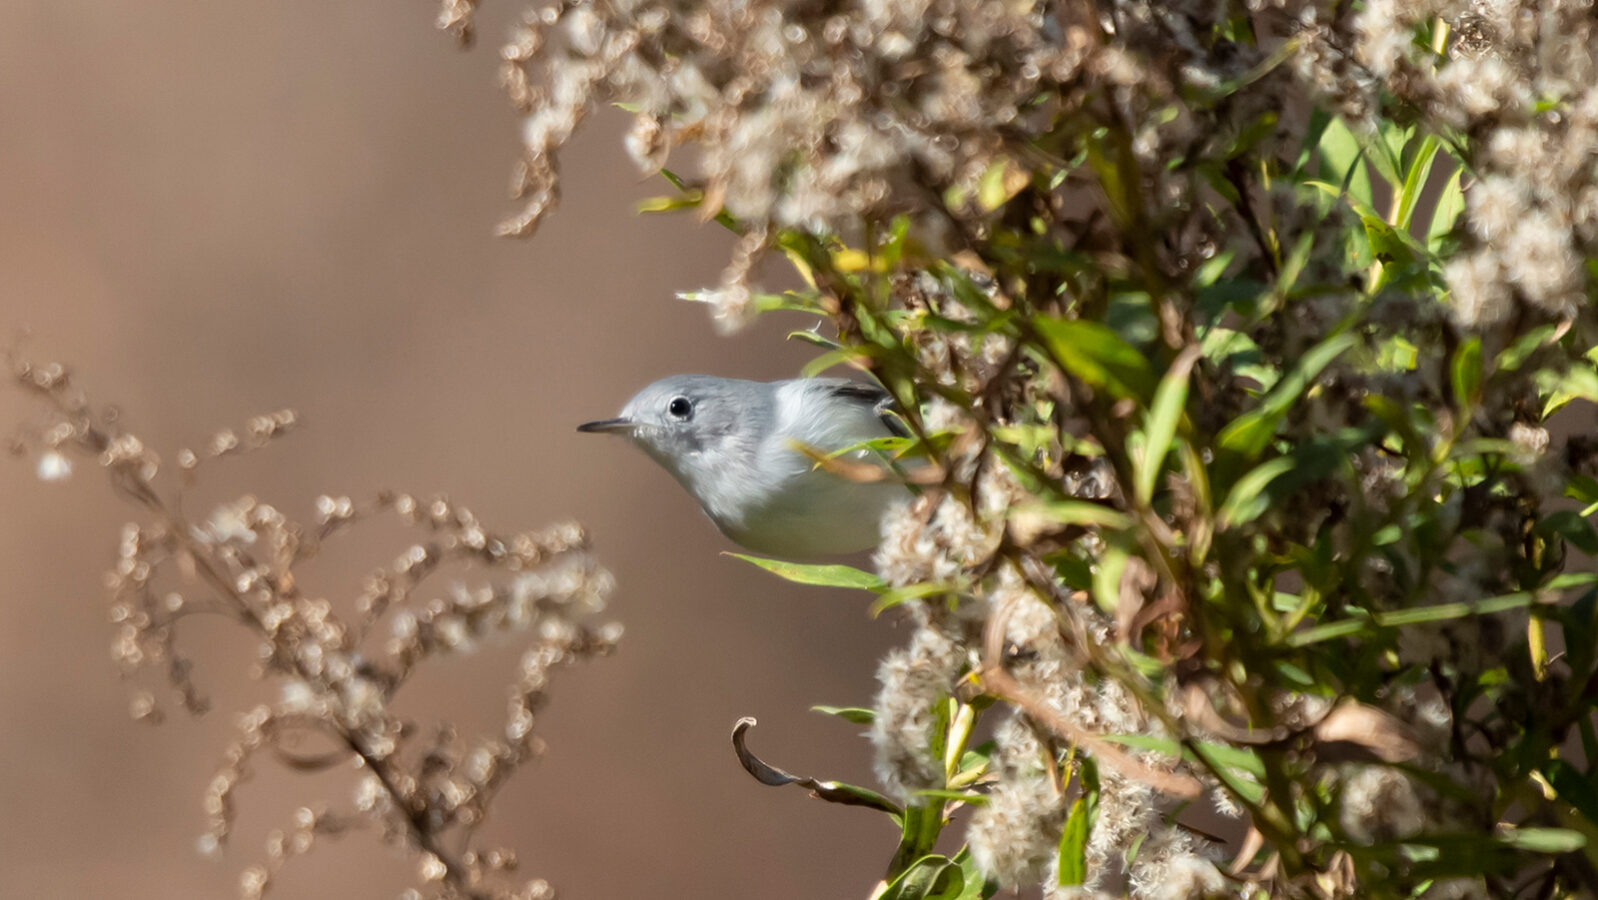 Blue-gray gnatcatcher looking out from behind vegetation